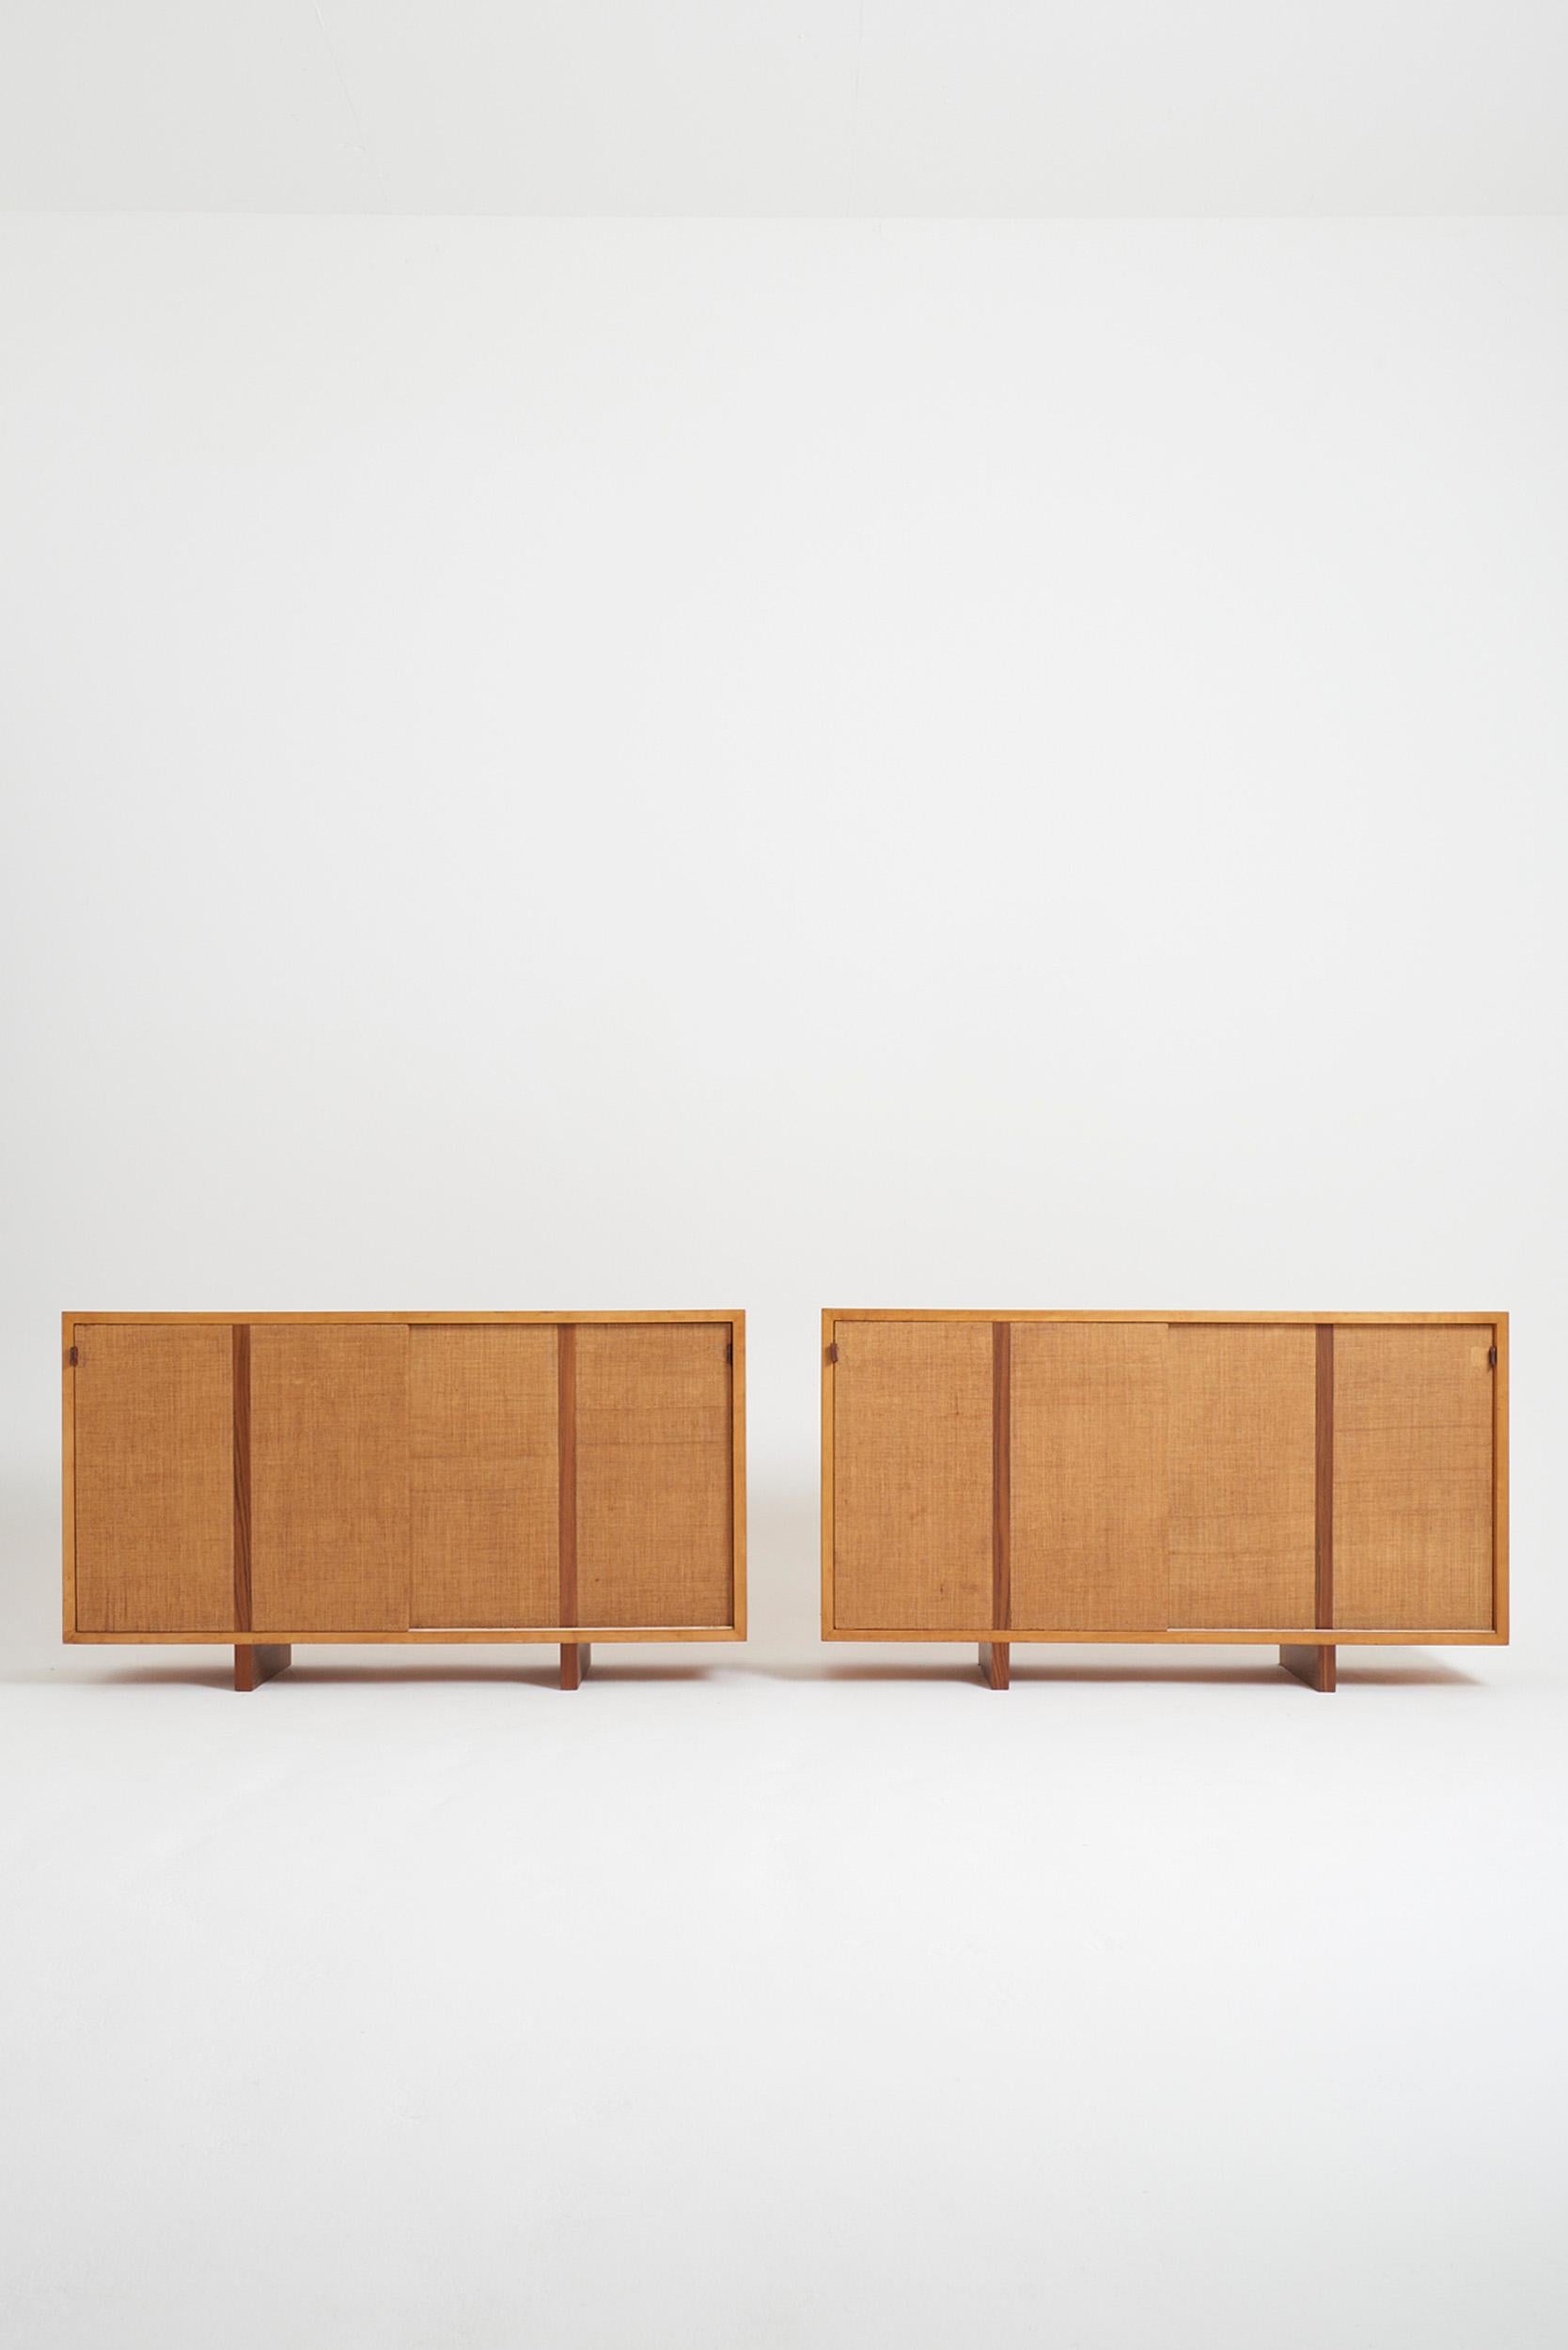 A pair of ash and hessian sideboards, the sliding doors opening with leather handles. 
Spain, 1970s
145 cm wide by 80 cm high by 42 cm deep 

Provenance: Former headquarters of the publishing house Gustavo Gili, building designed in 1953, by